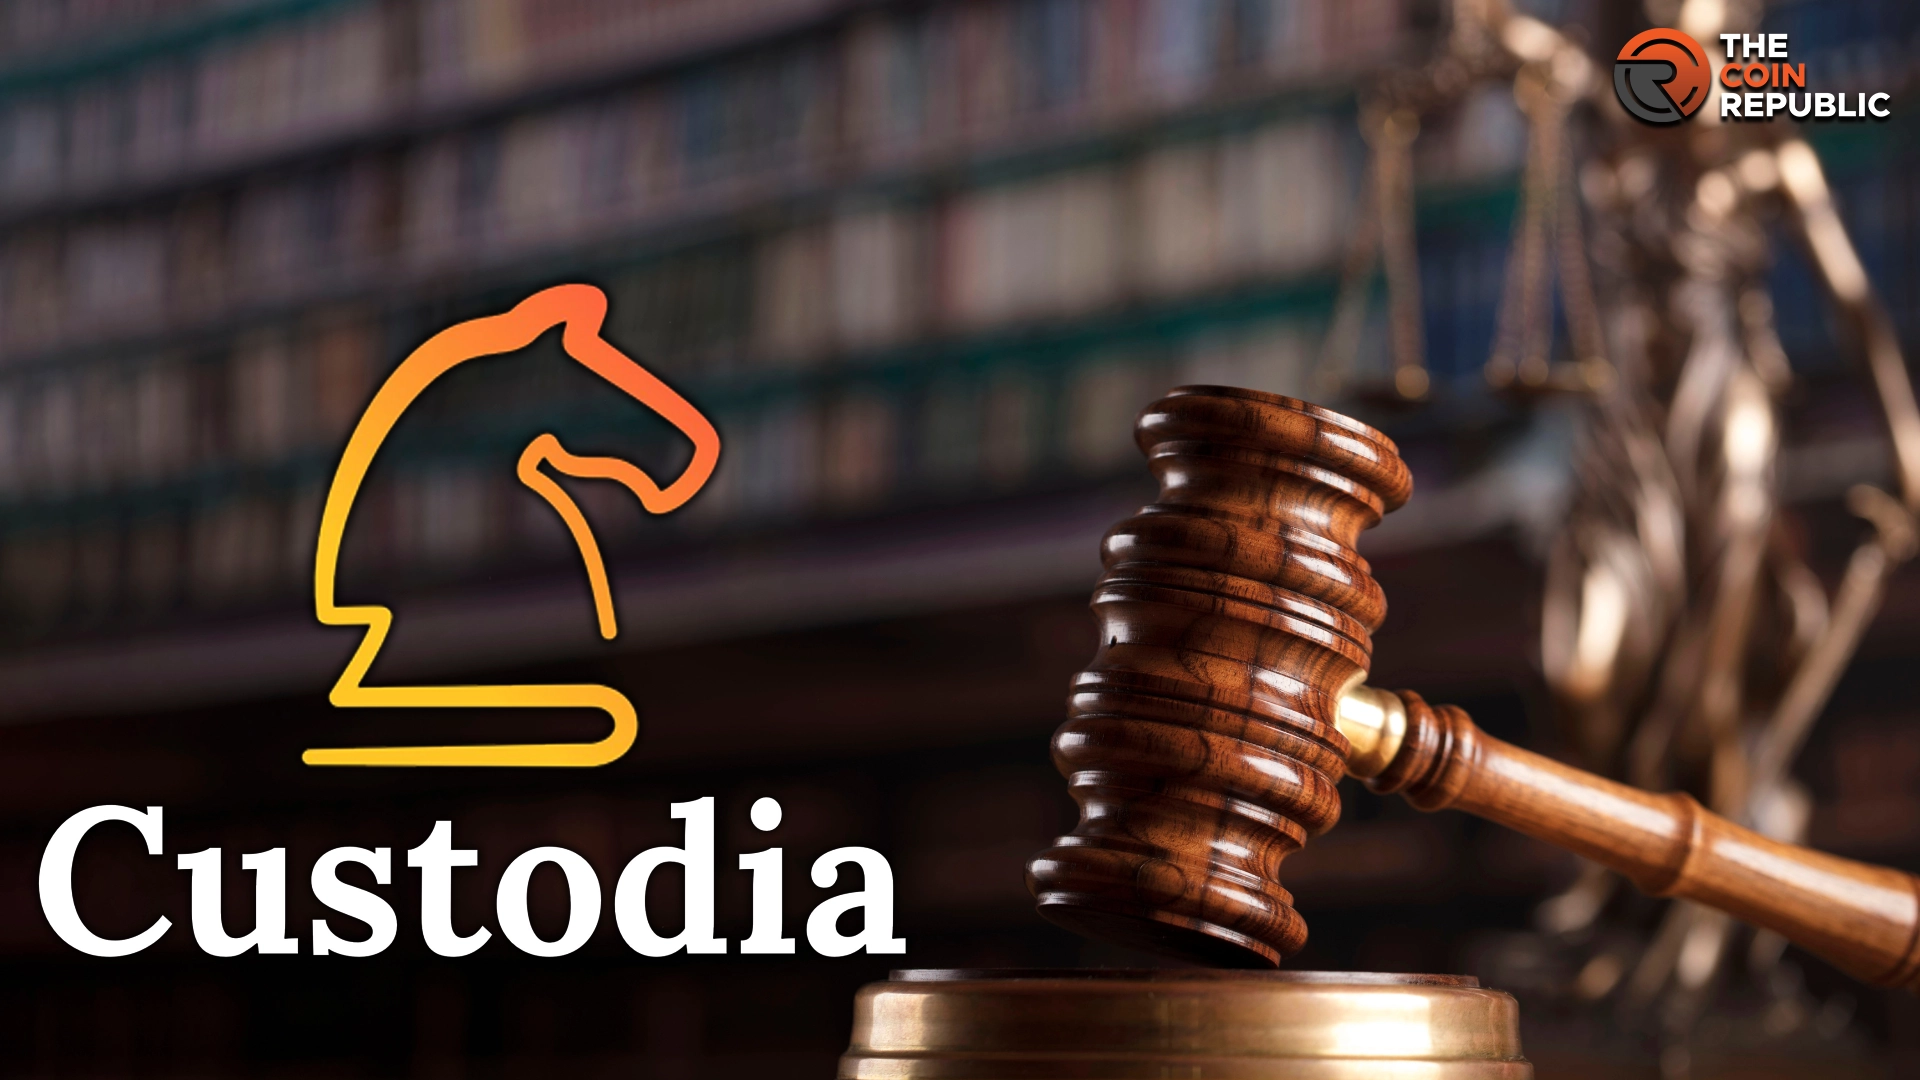 Custodia Bank’s Legal Appeal To Join U.S. Banking System